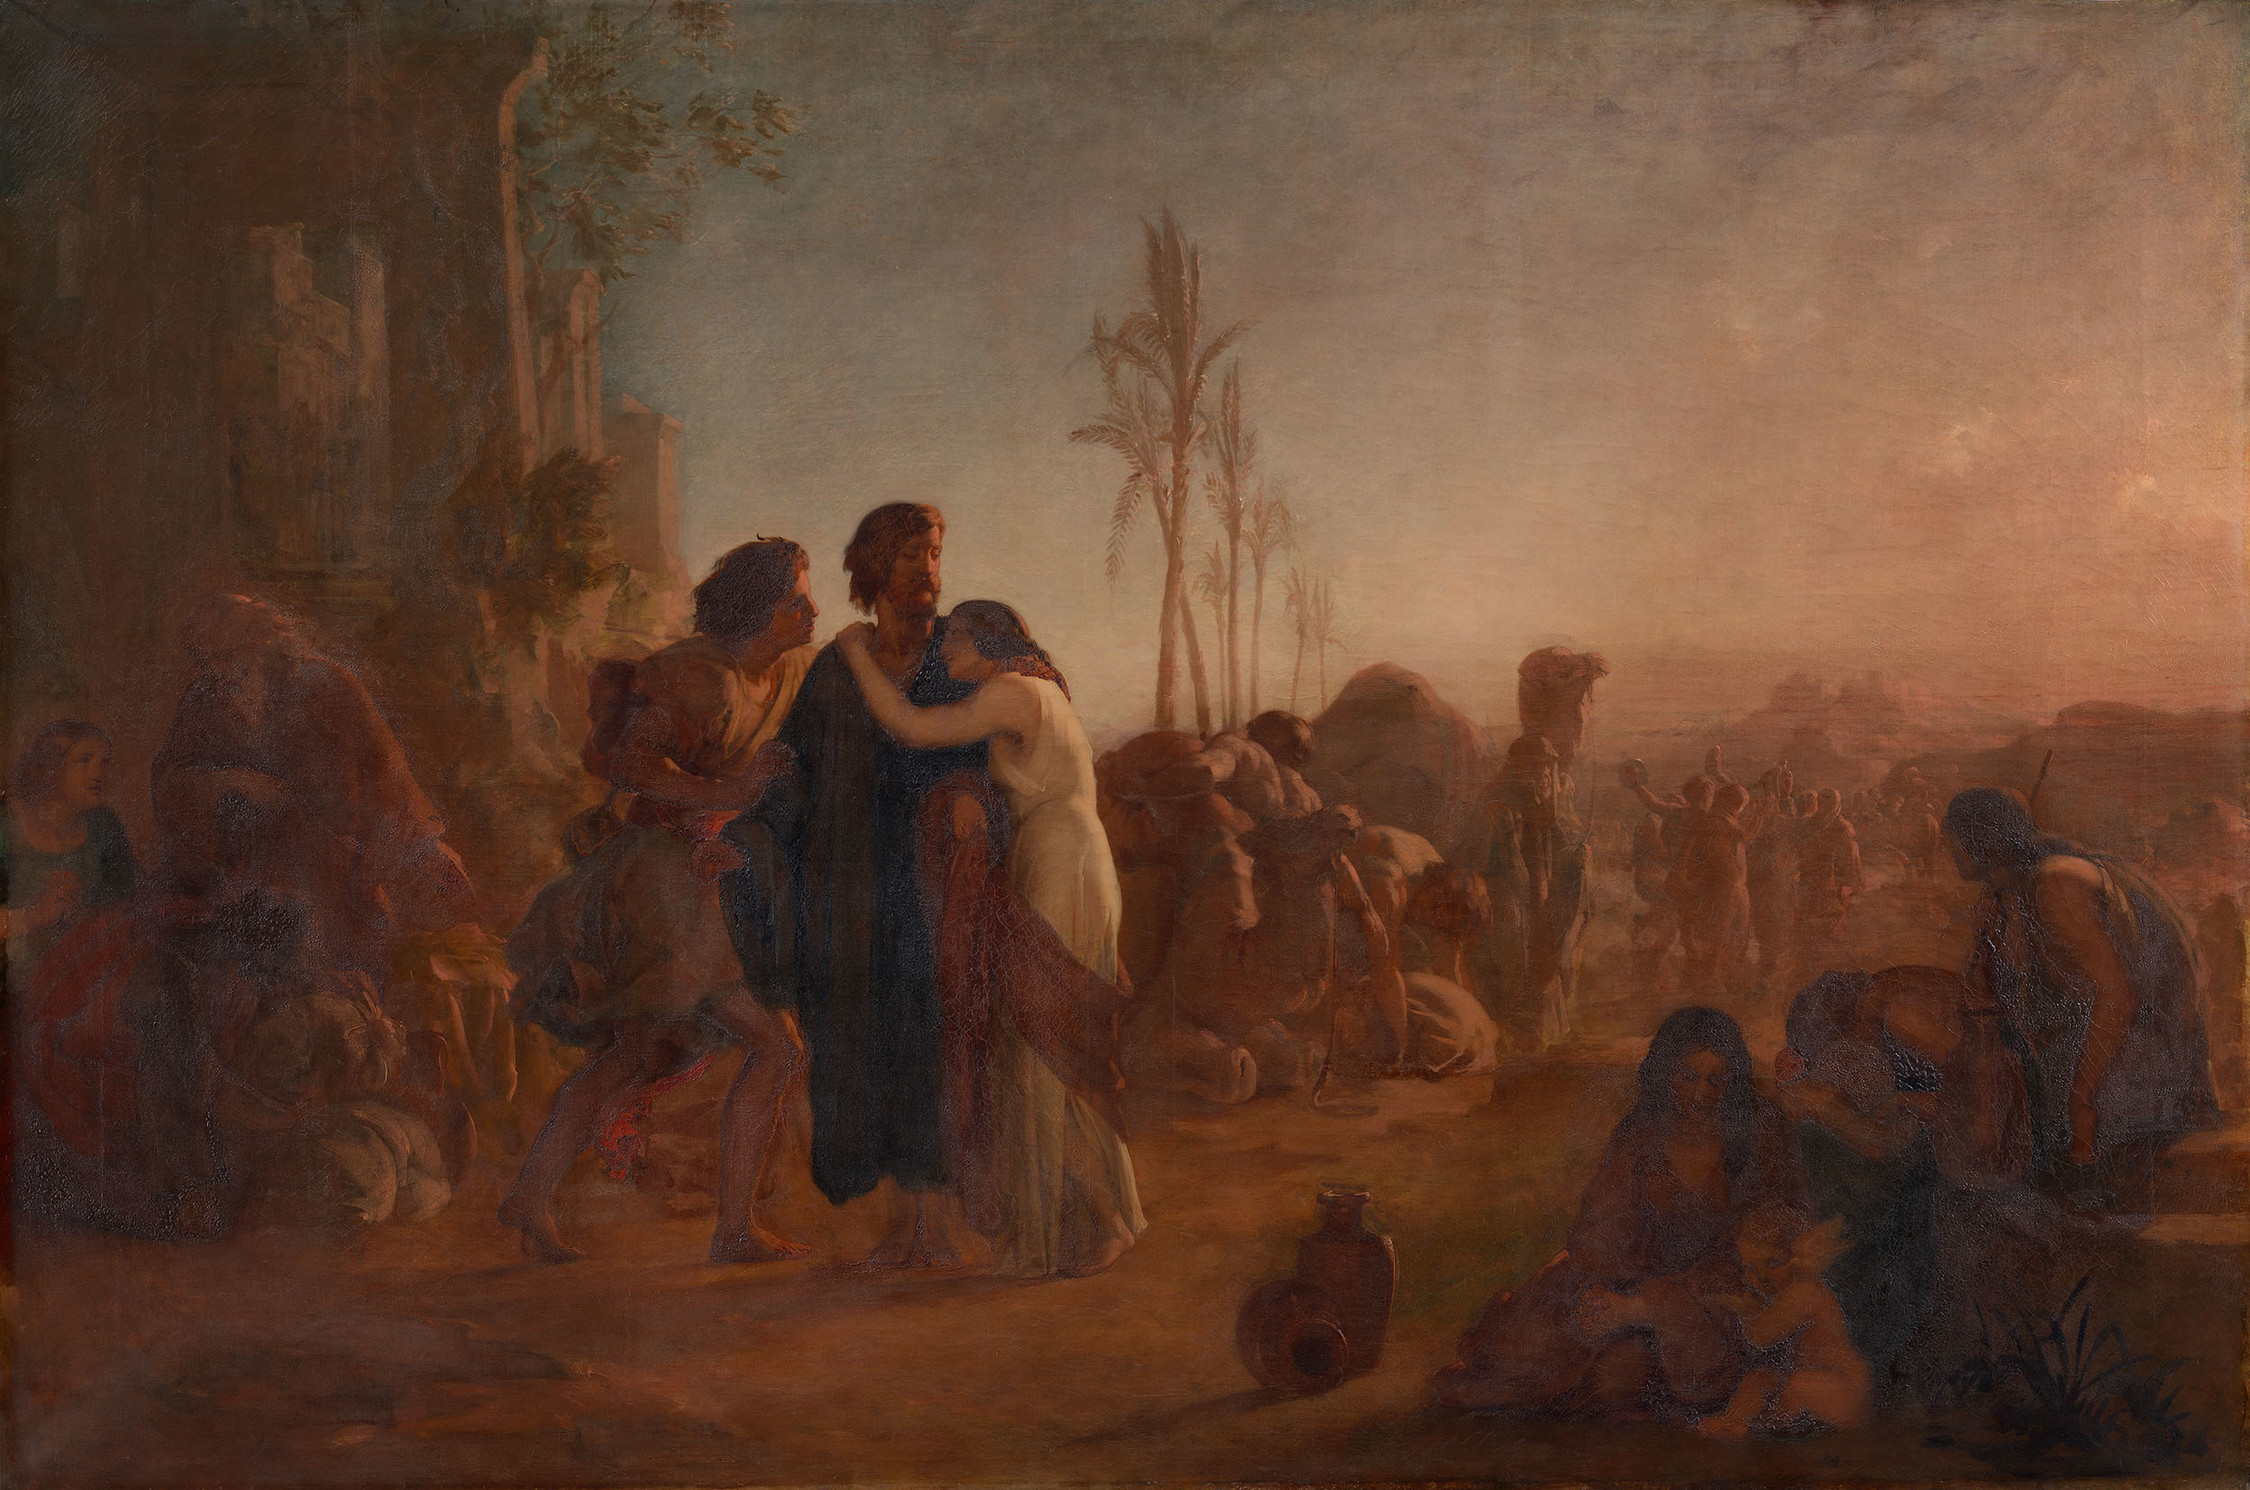 The Liberation of Slaves (Henry Le Jeune, oil on canvas, 1847)